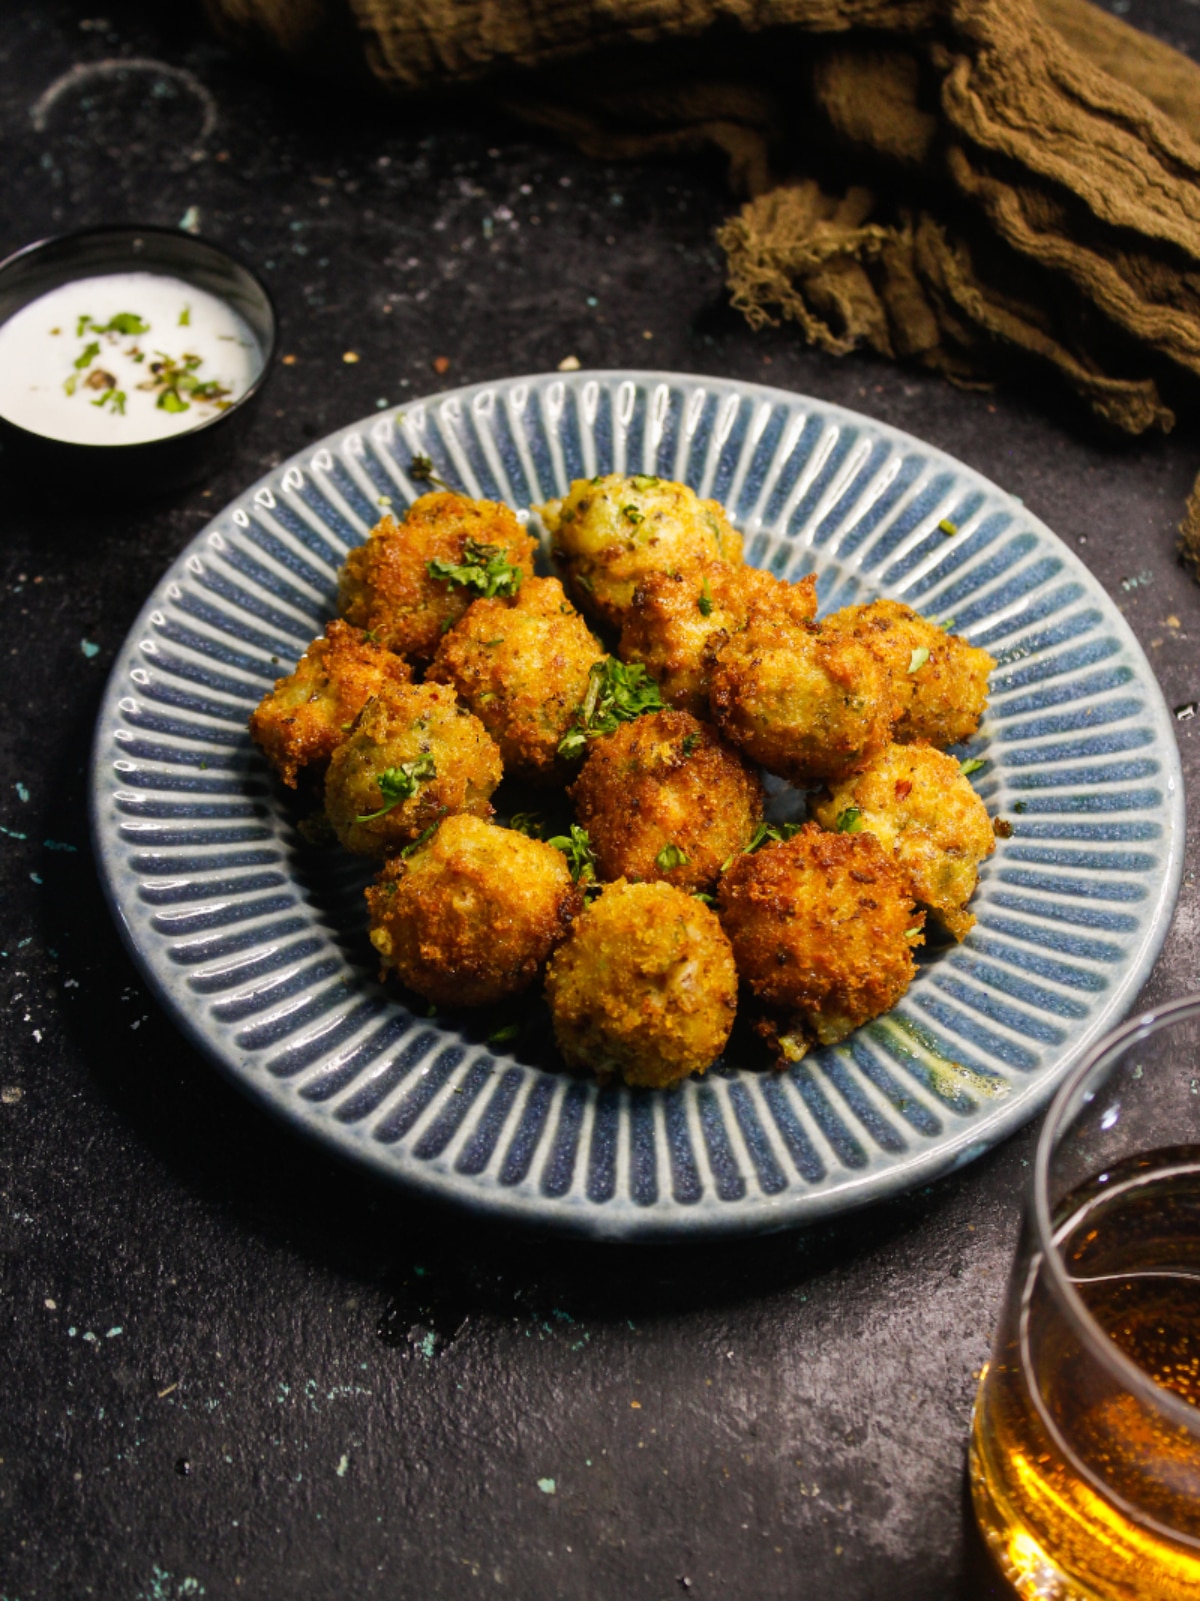 Top view image of Crispy Fried Cheesy Potato Balls with curd